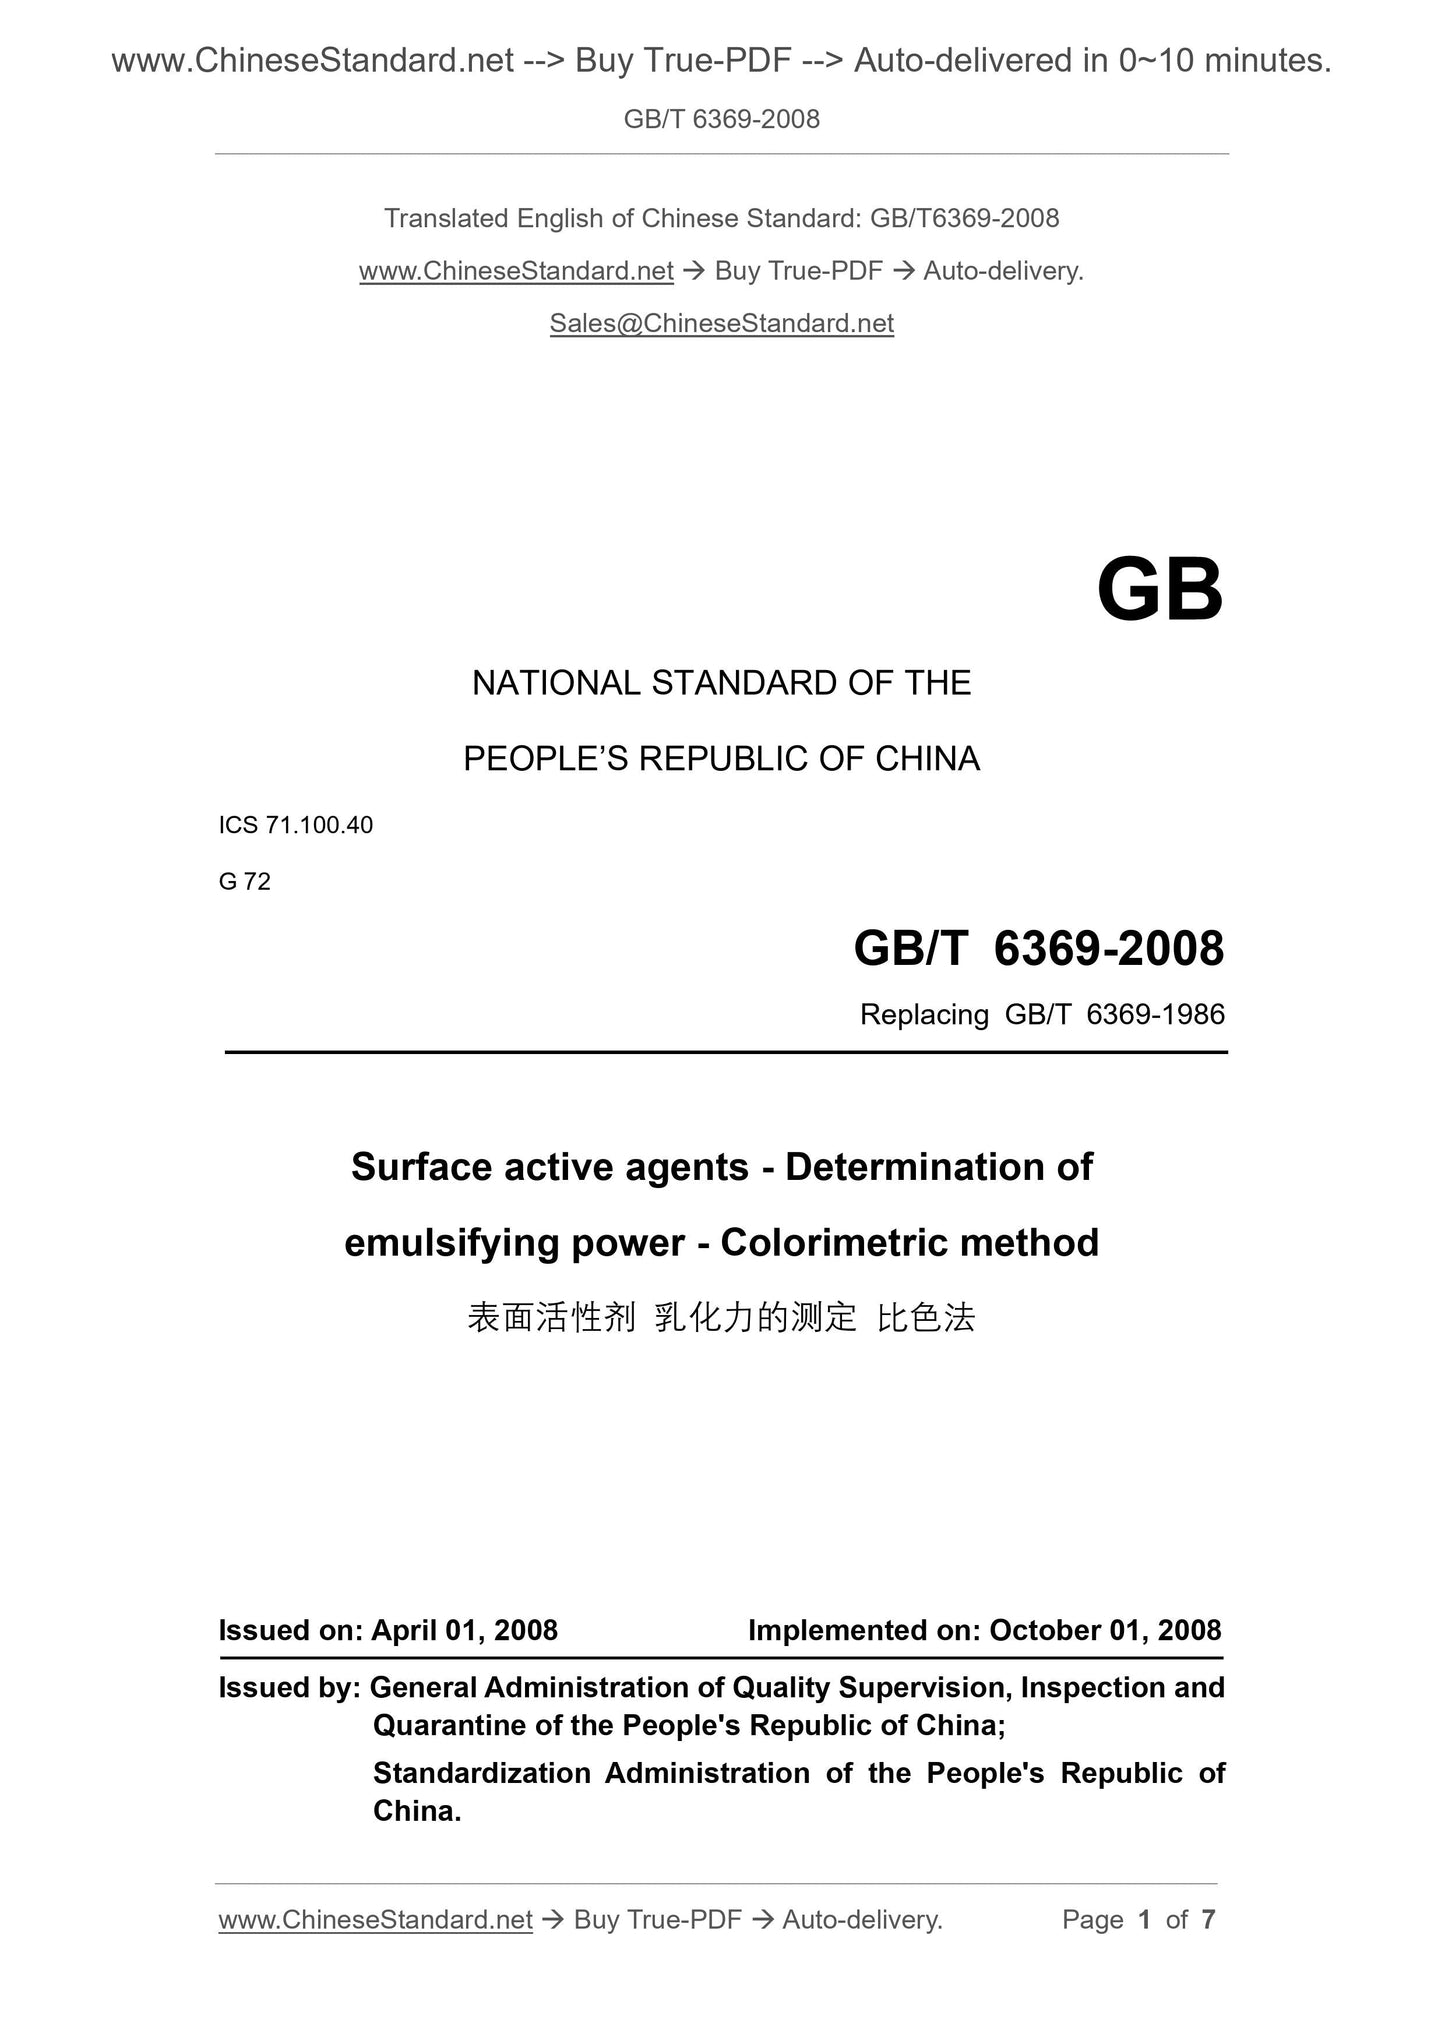 GB/T 6369-2008 Page 1